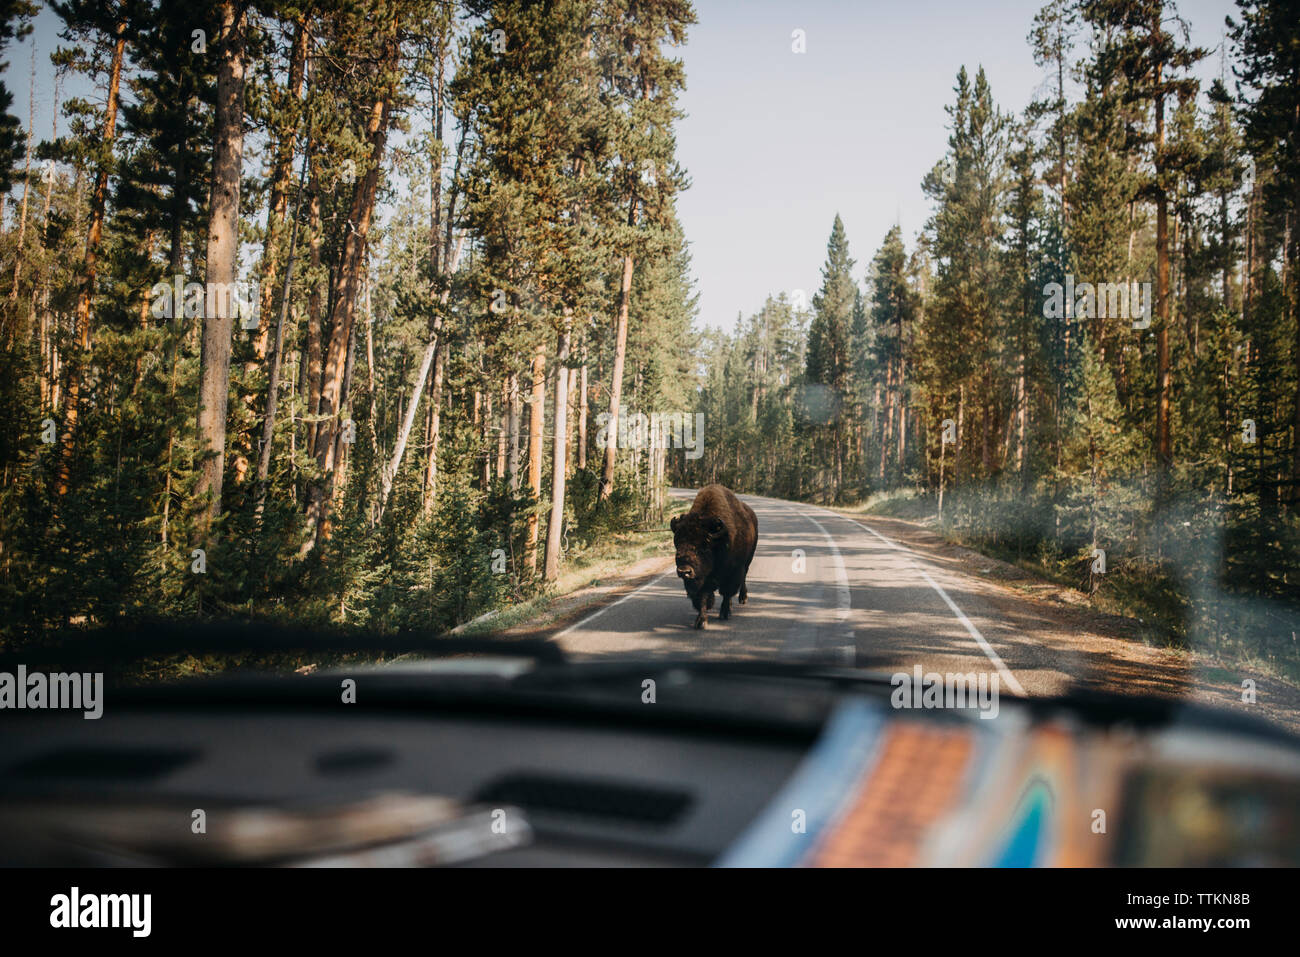 American bison on road seen through car's windshield at Yellowstone National Park Stock Photo